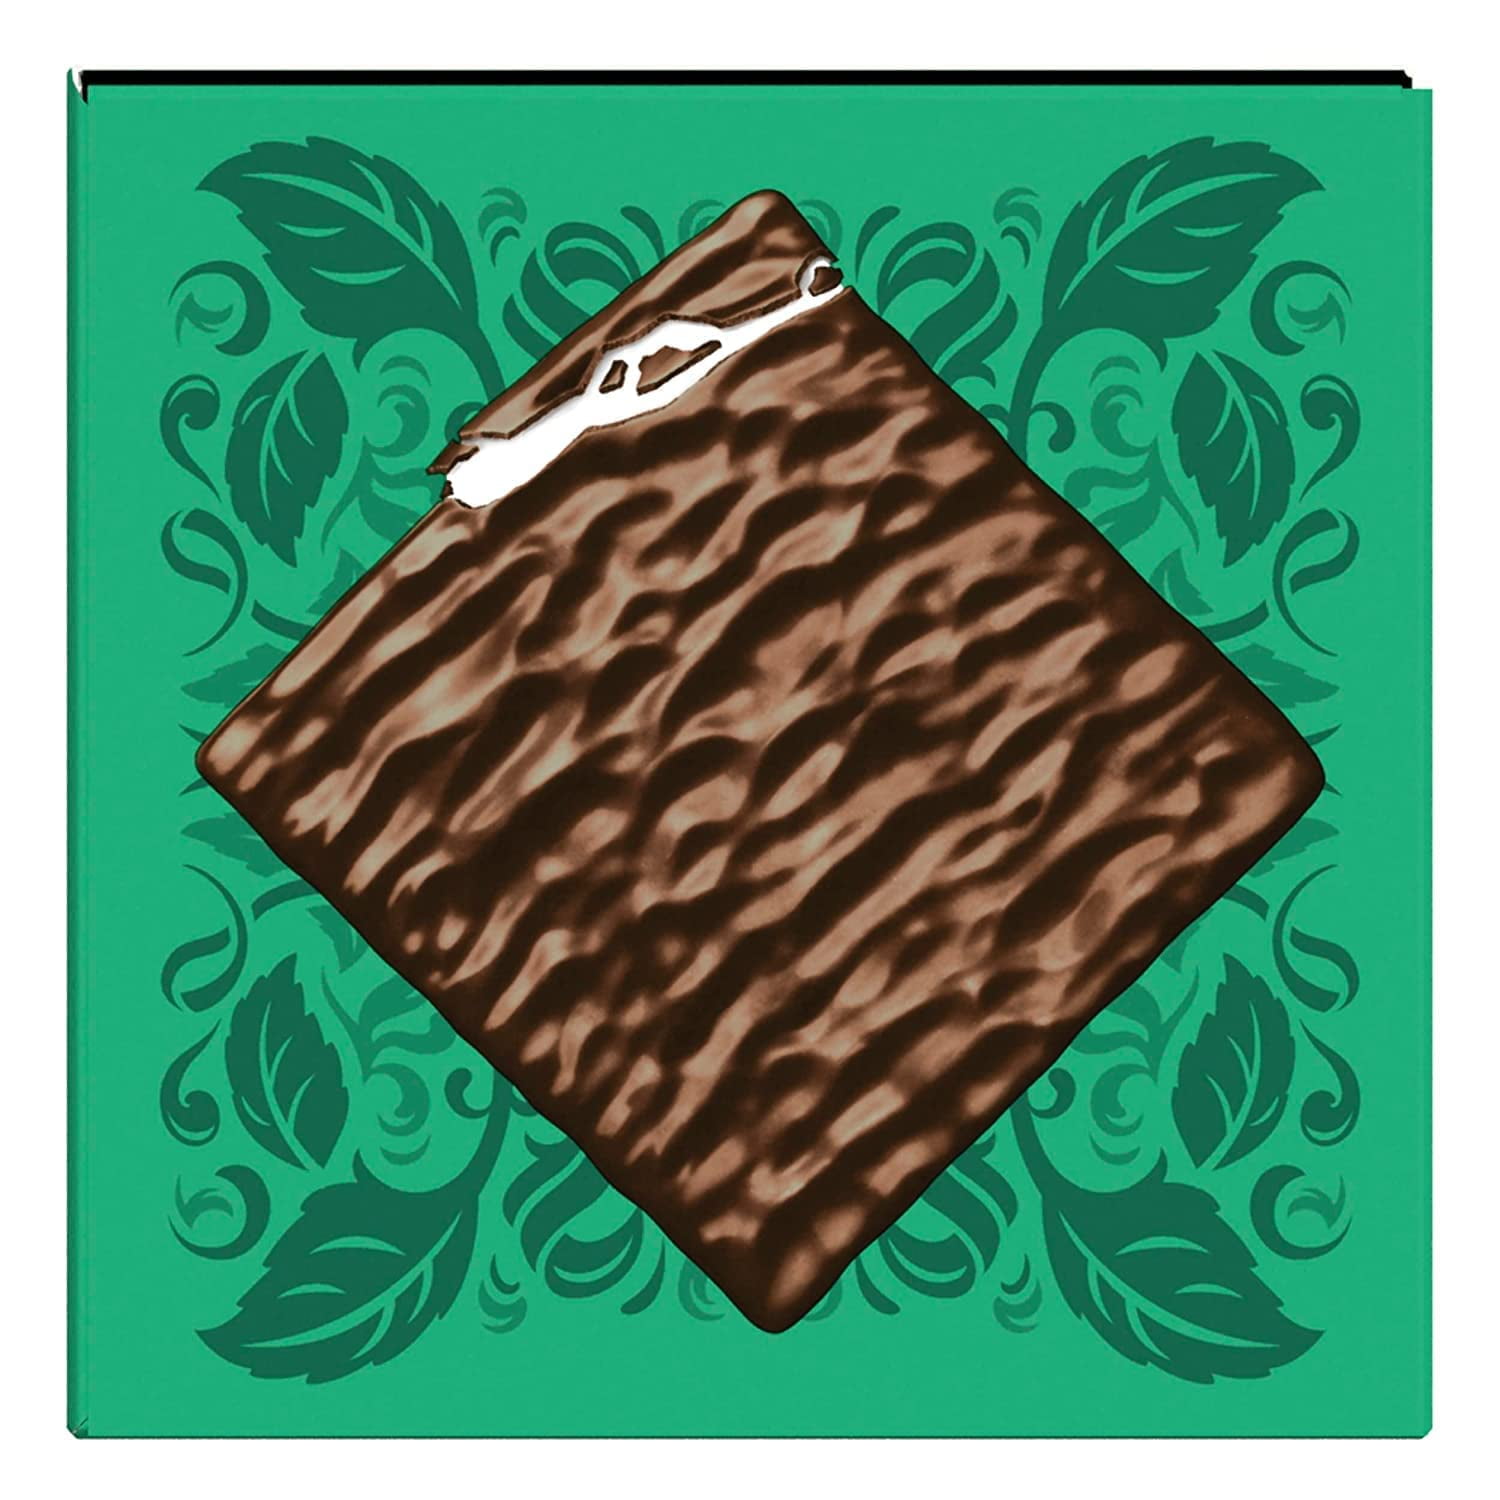 After Eight Dark Chocolate Mints, 3-count (3 x 300g)